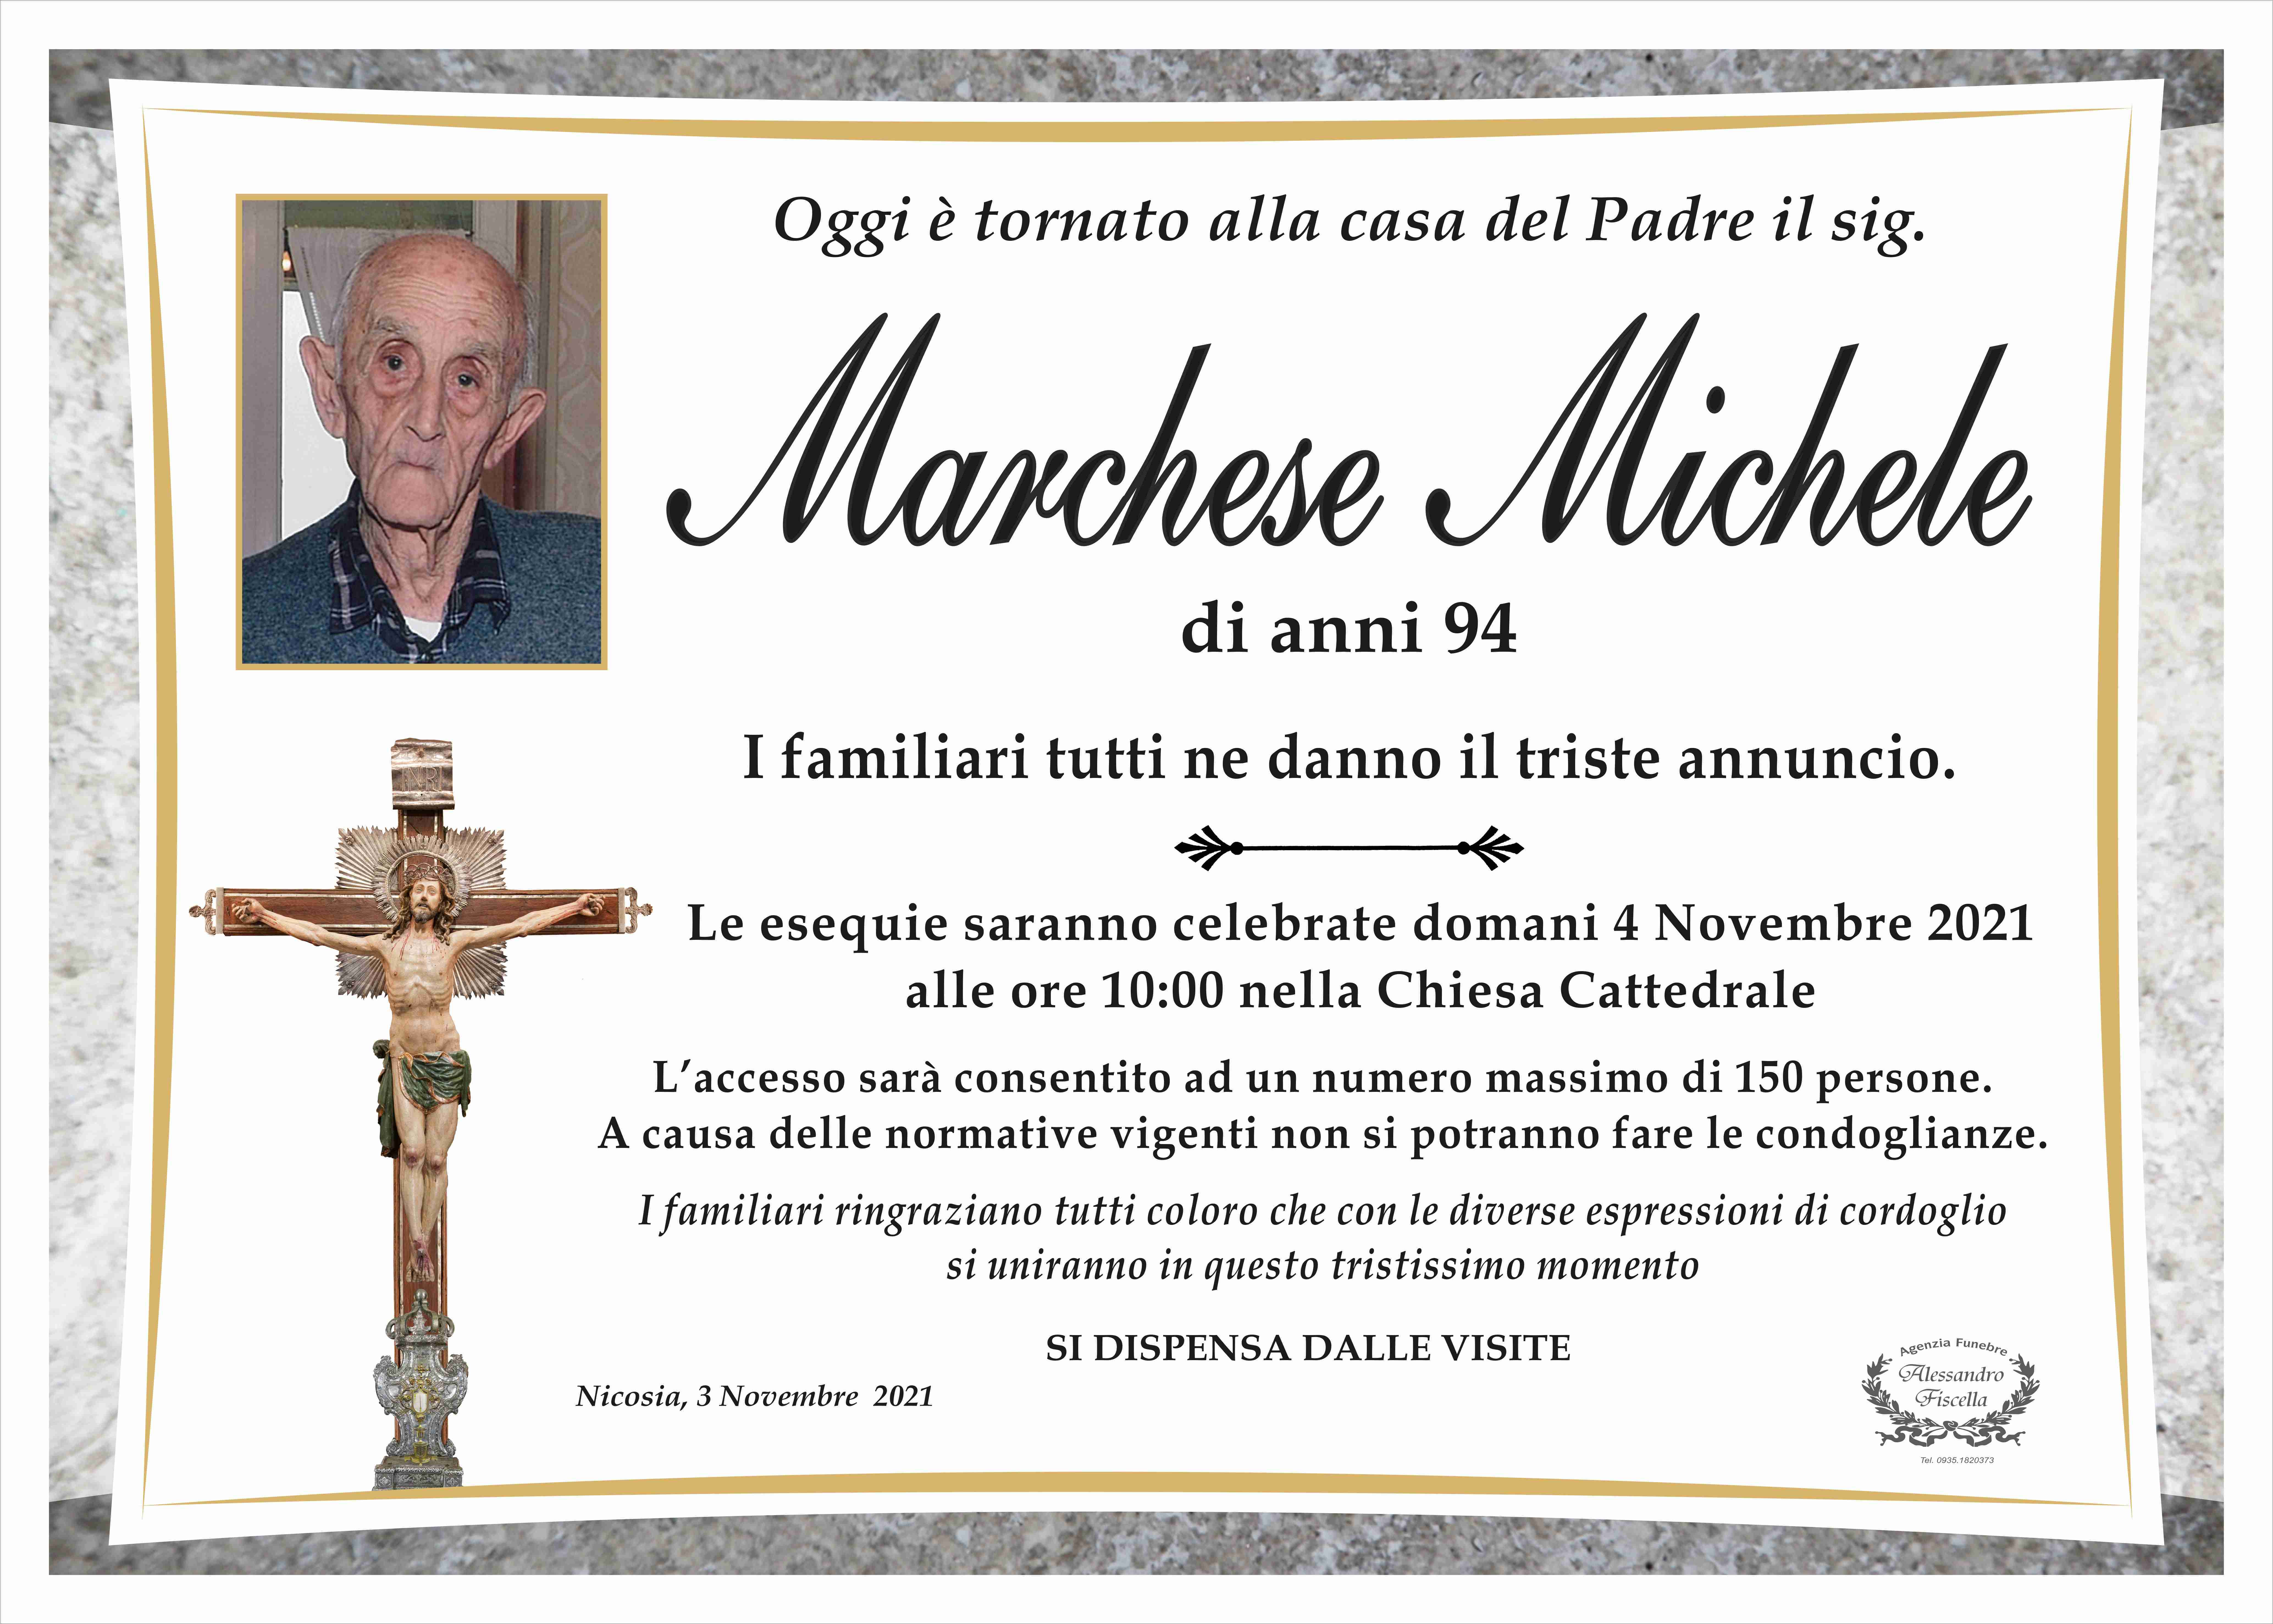 Michele Marchese